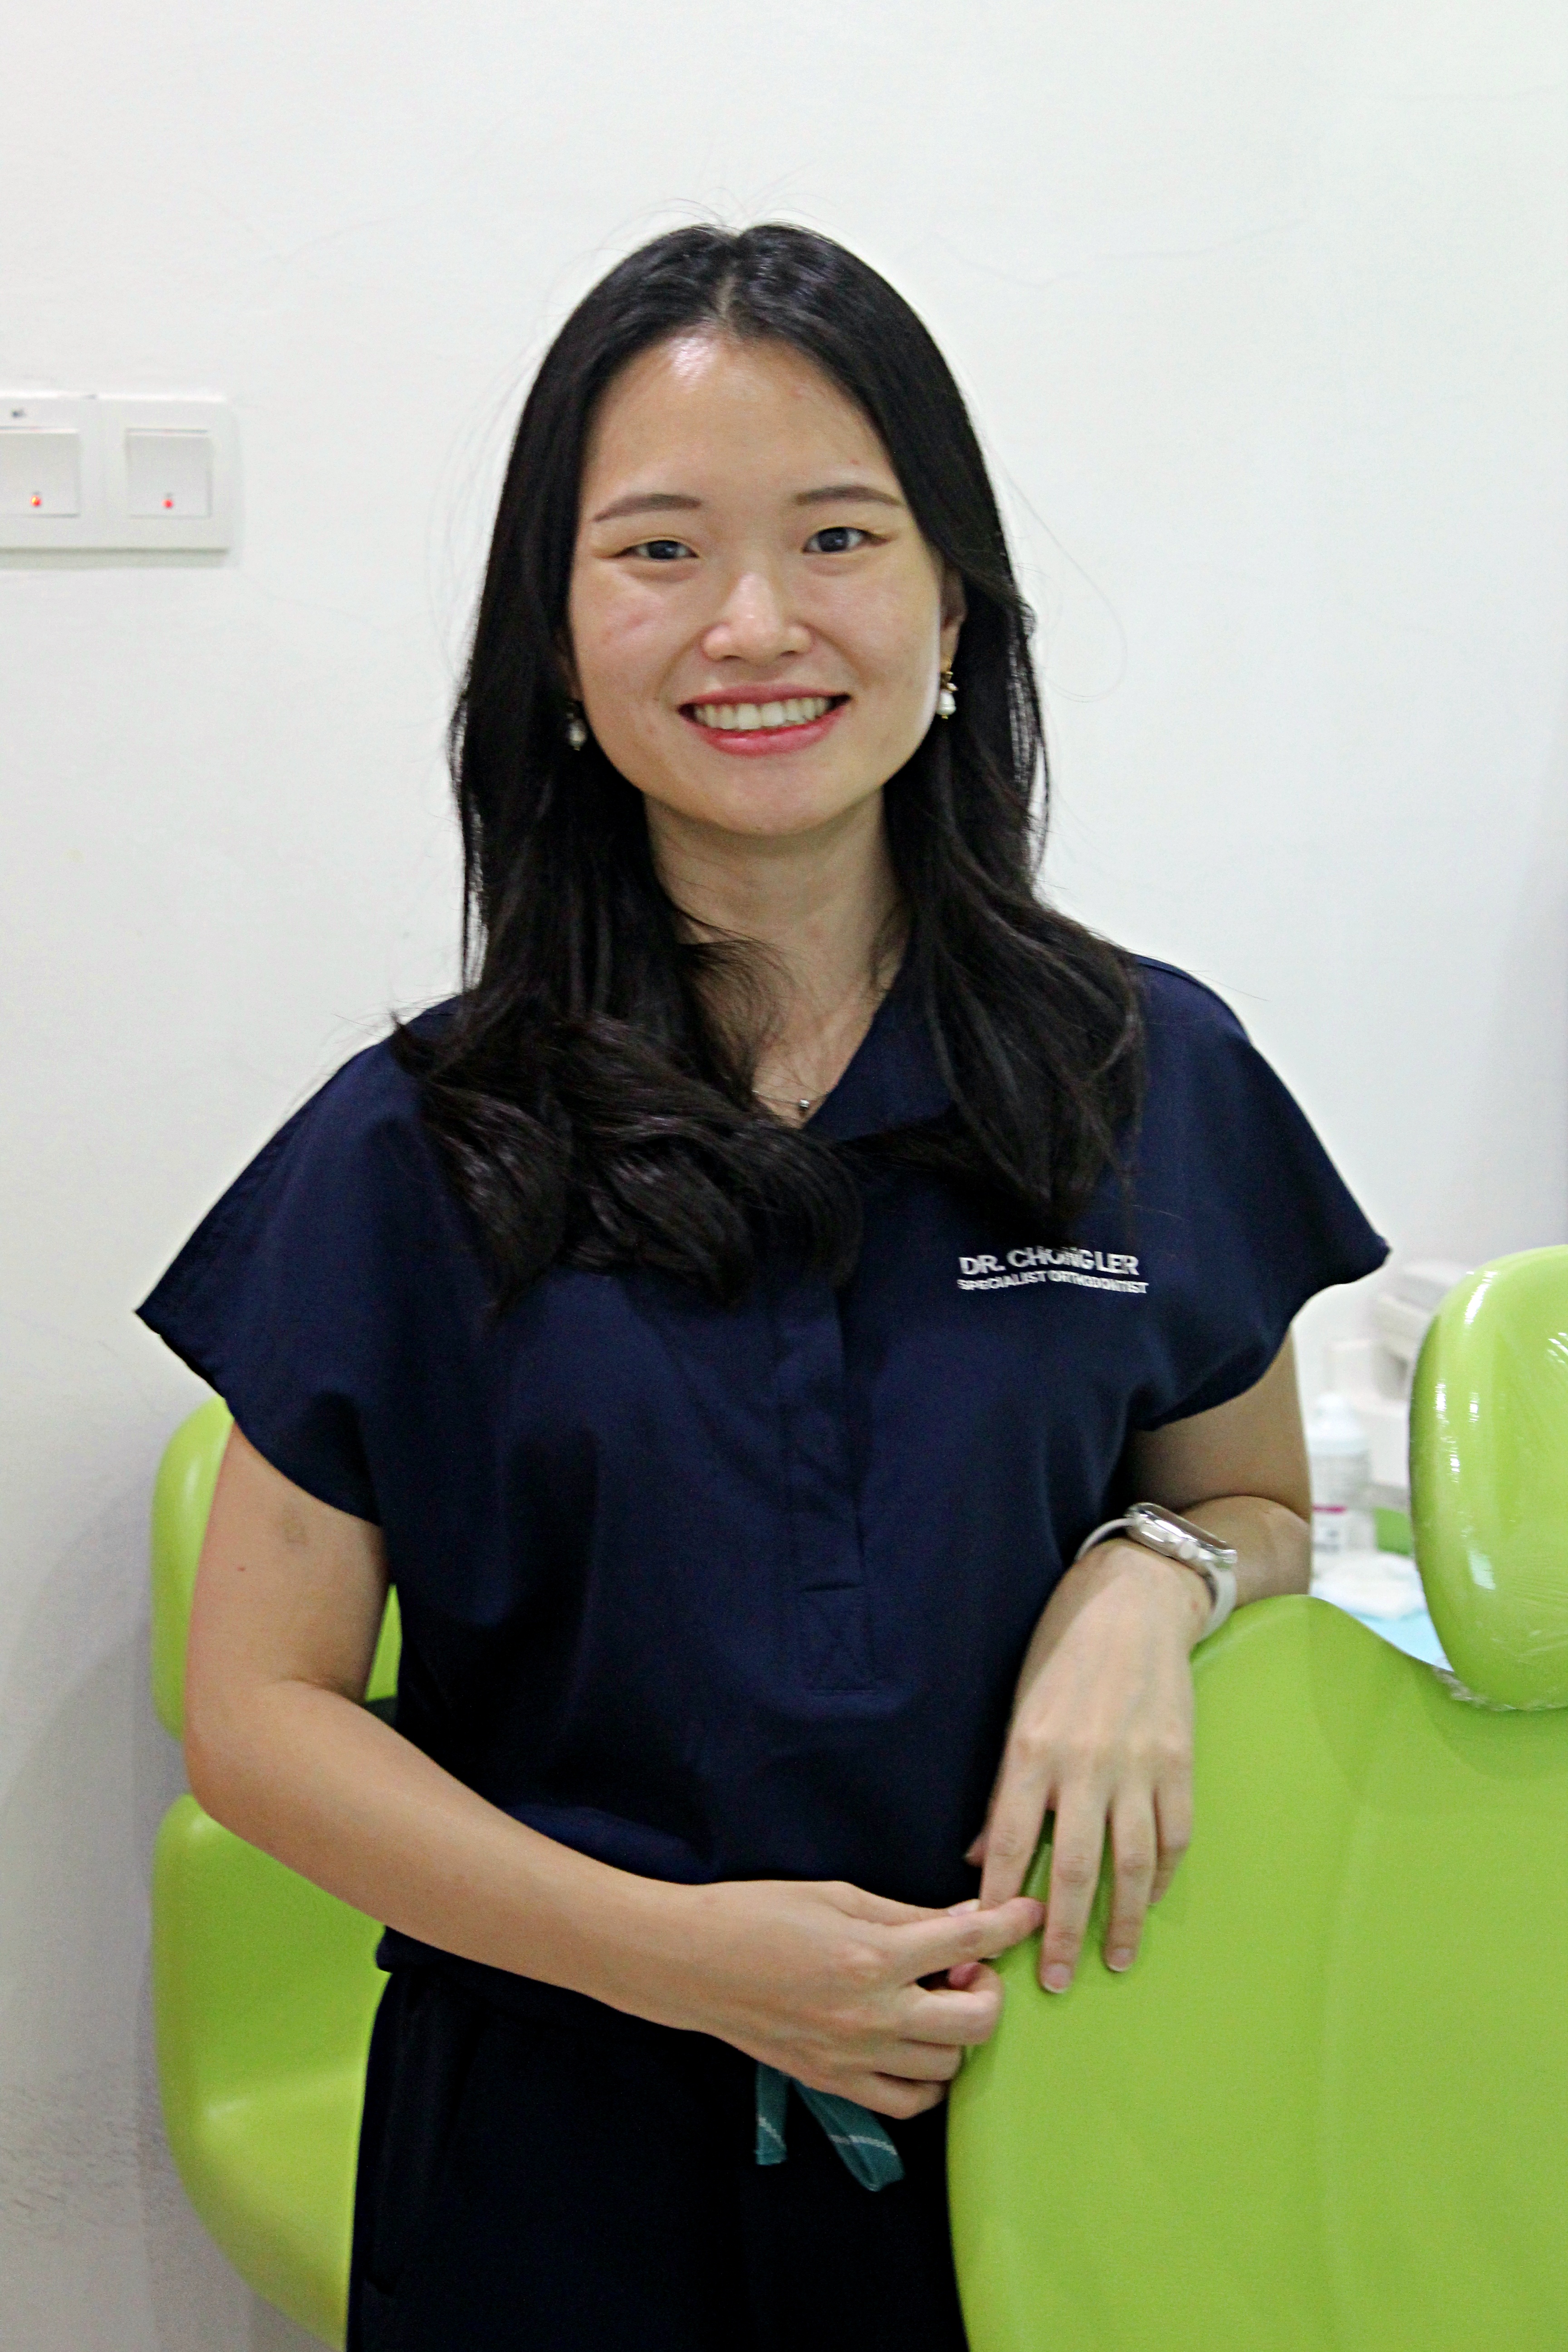 Dr. Chong Ler (Specialist Orthodontist) 